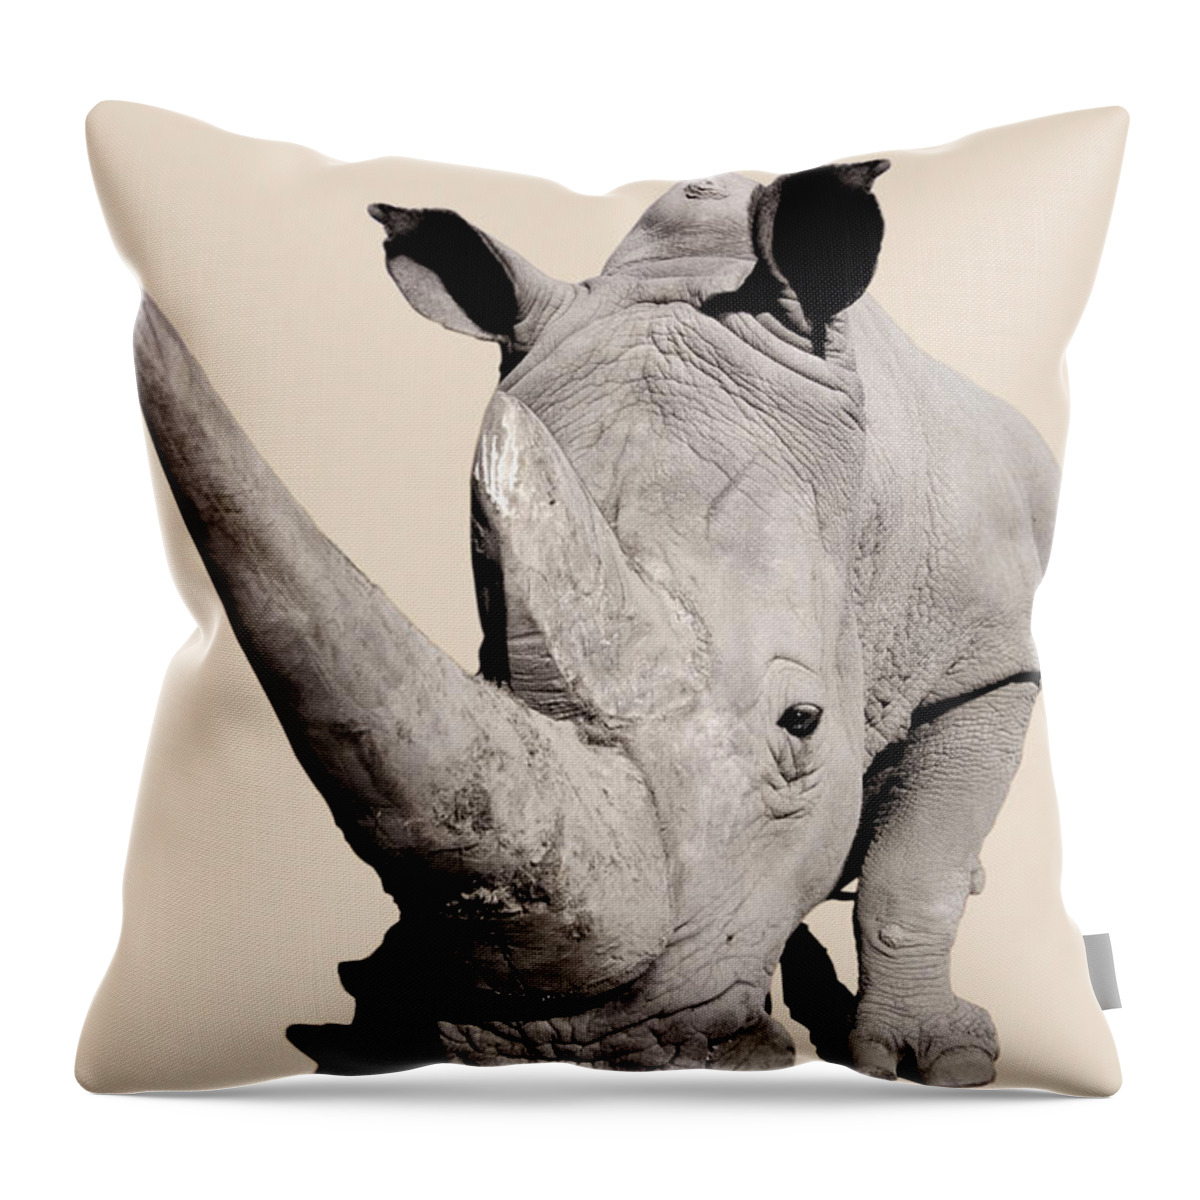 Powerful Throw Pillow featuring the photograph Rhinocerosafrica by Thomas Kitchin & Victoria Hurst